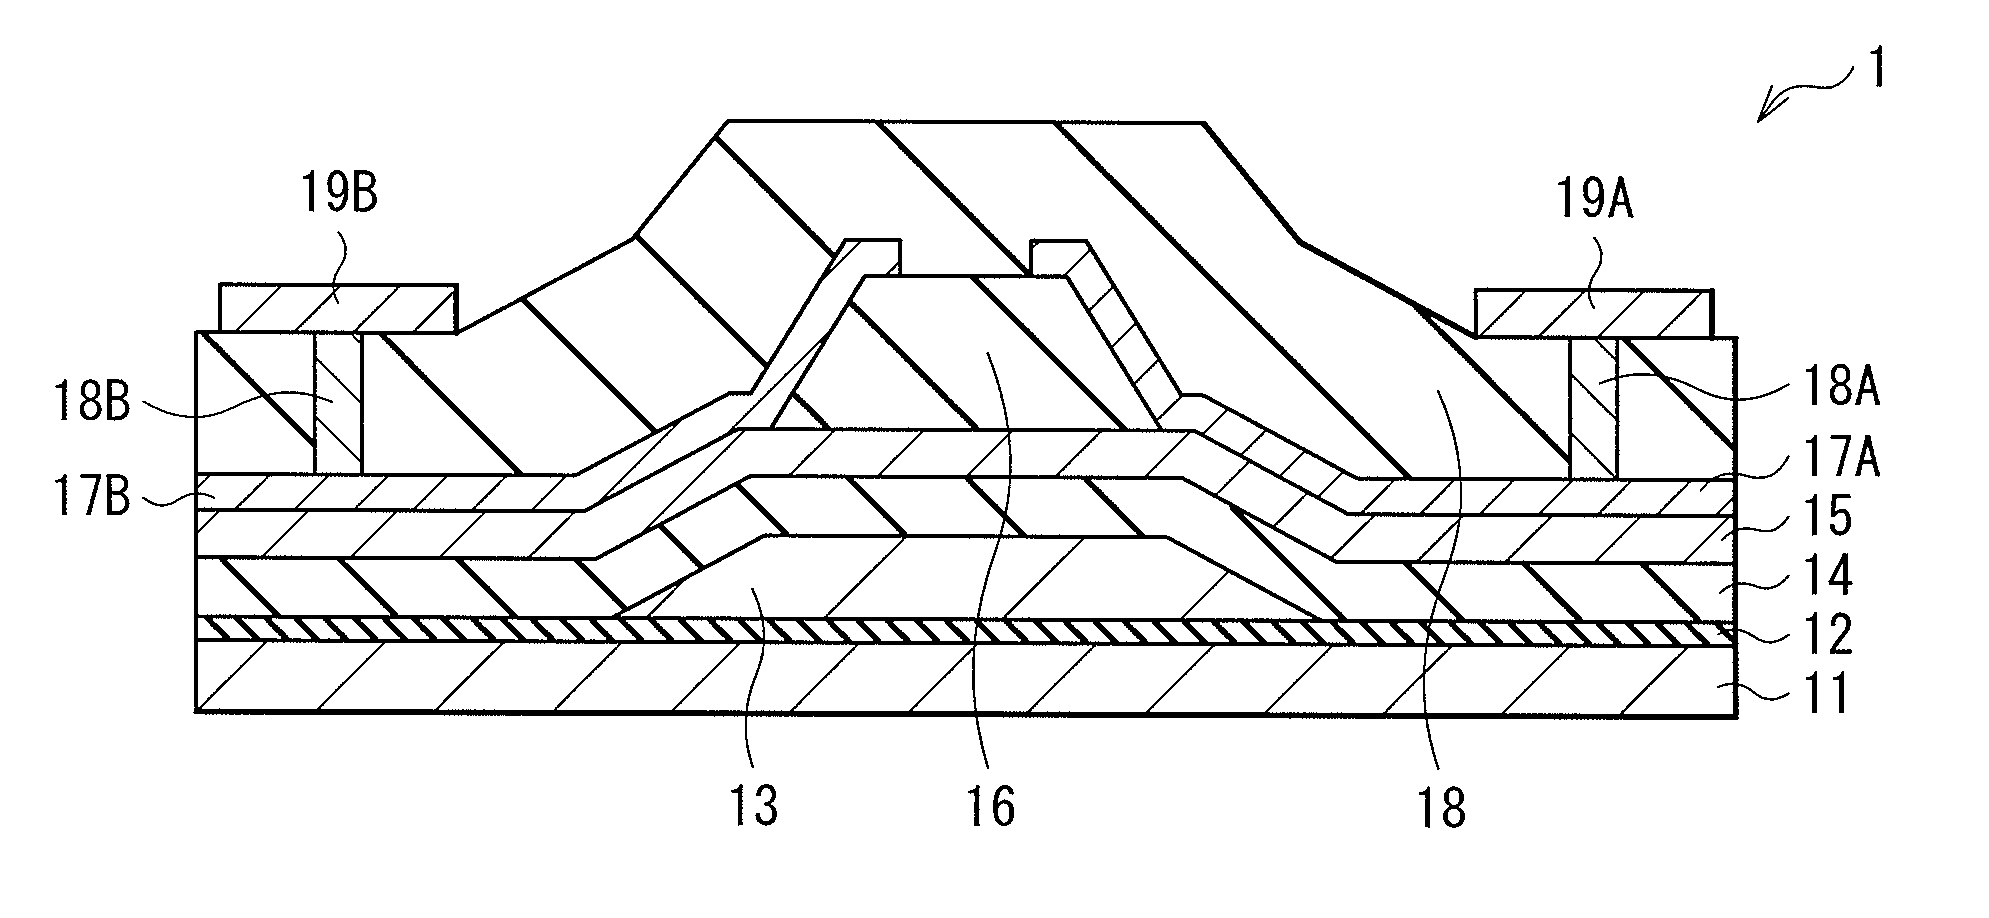 Thin film transistor, display device, and electronic device